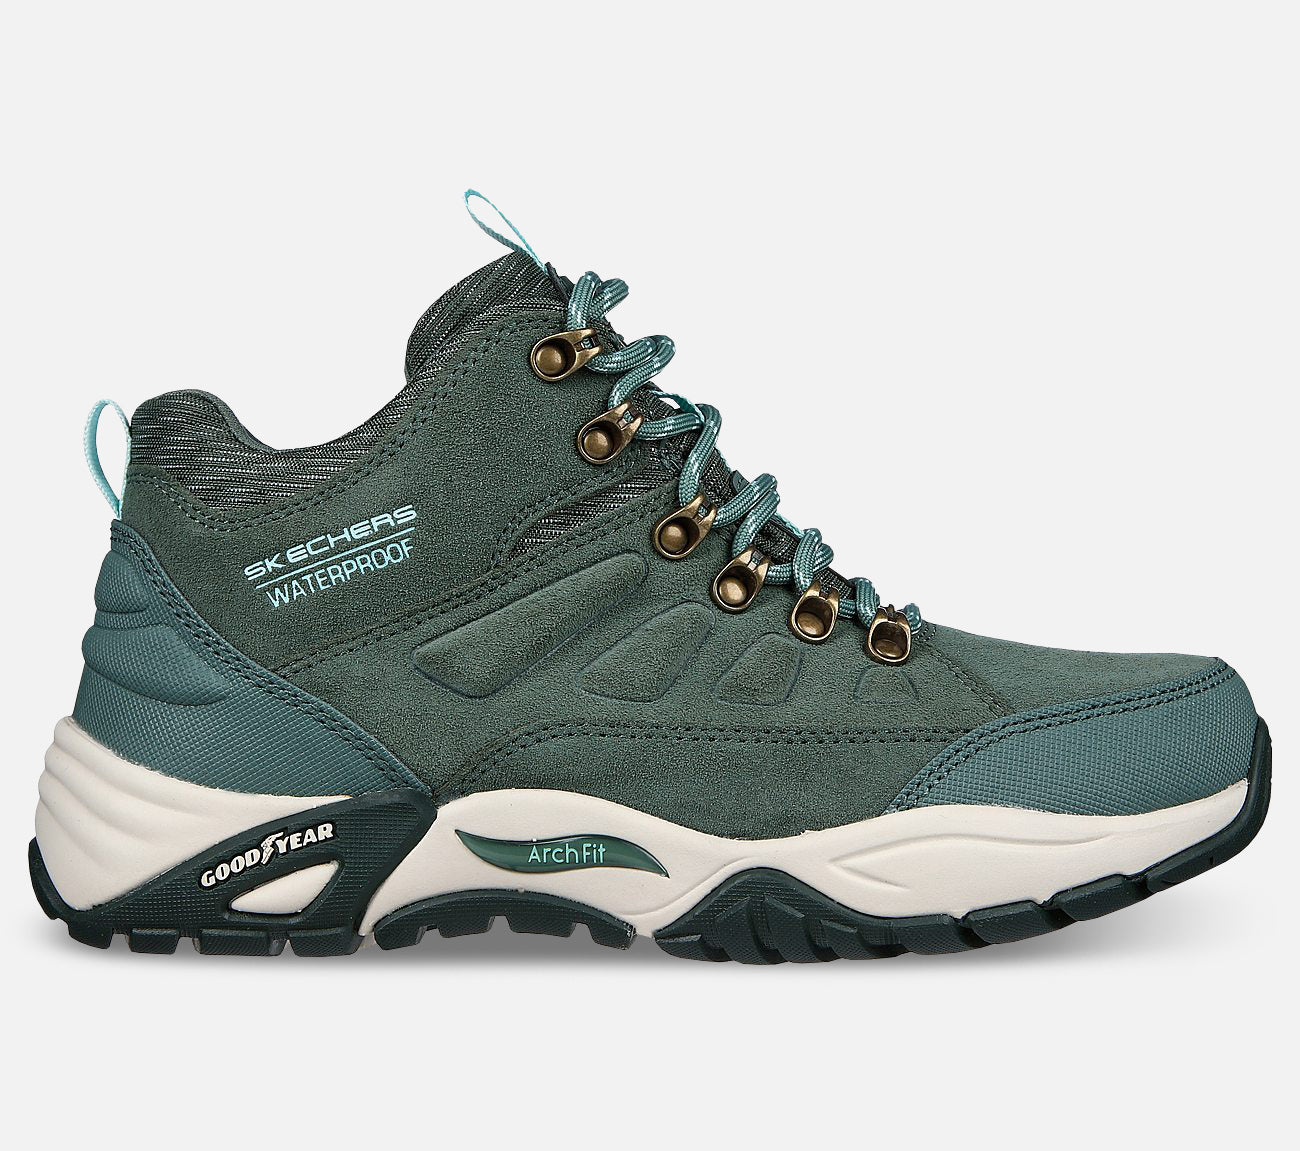 Relaxed Fit Arch Fit Recon - Waterproof Boot Skechers